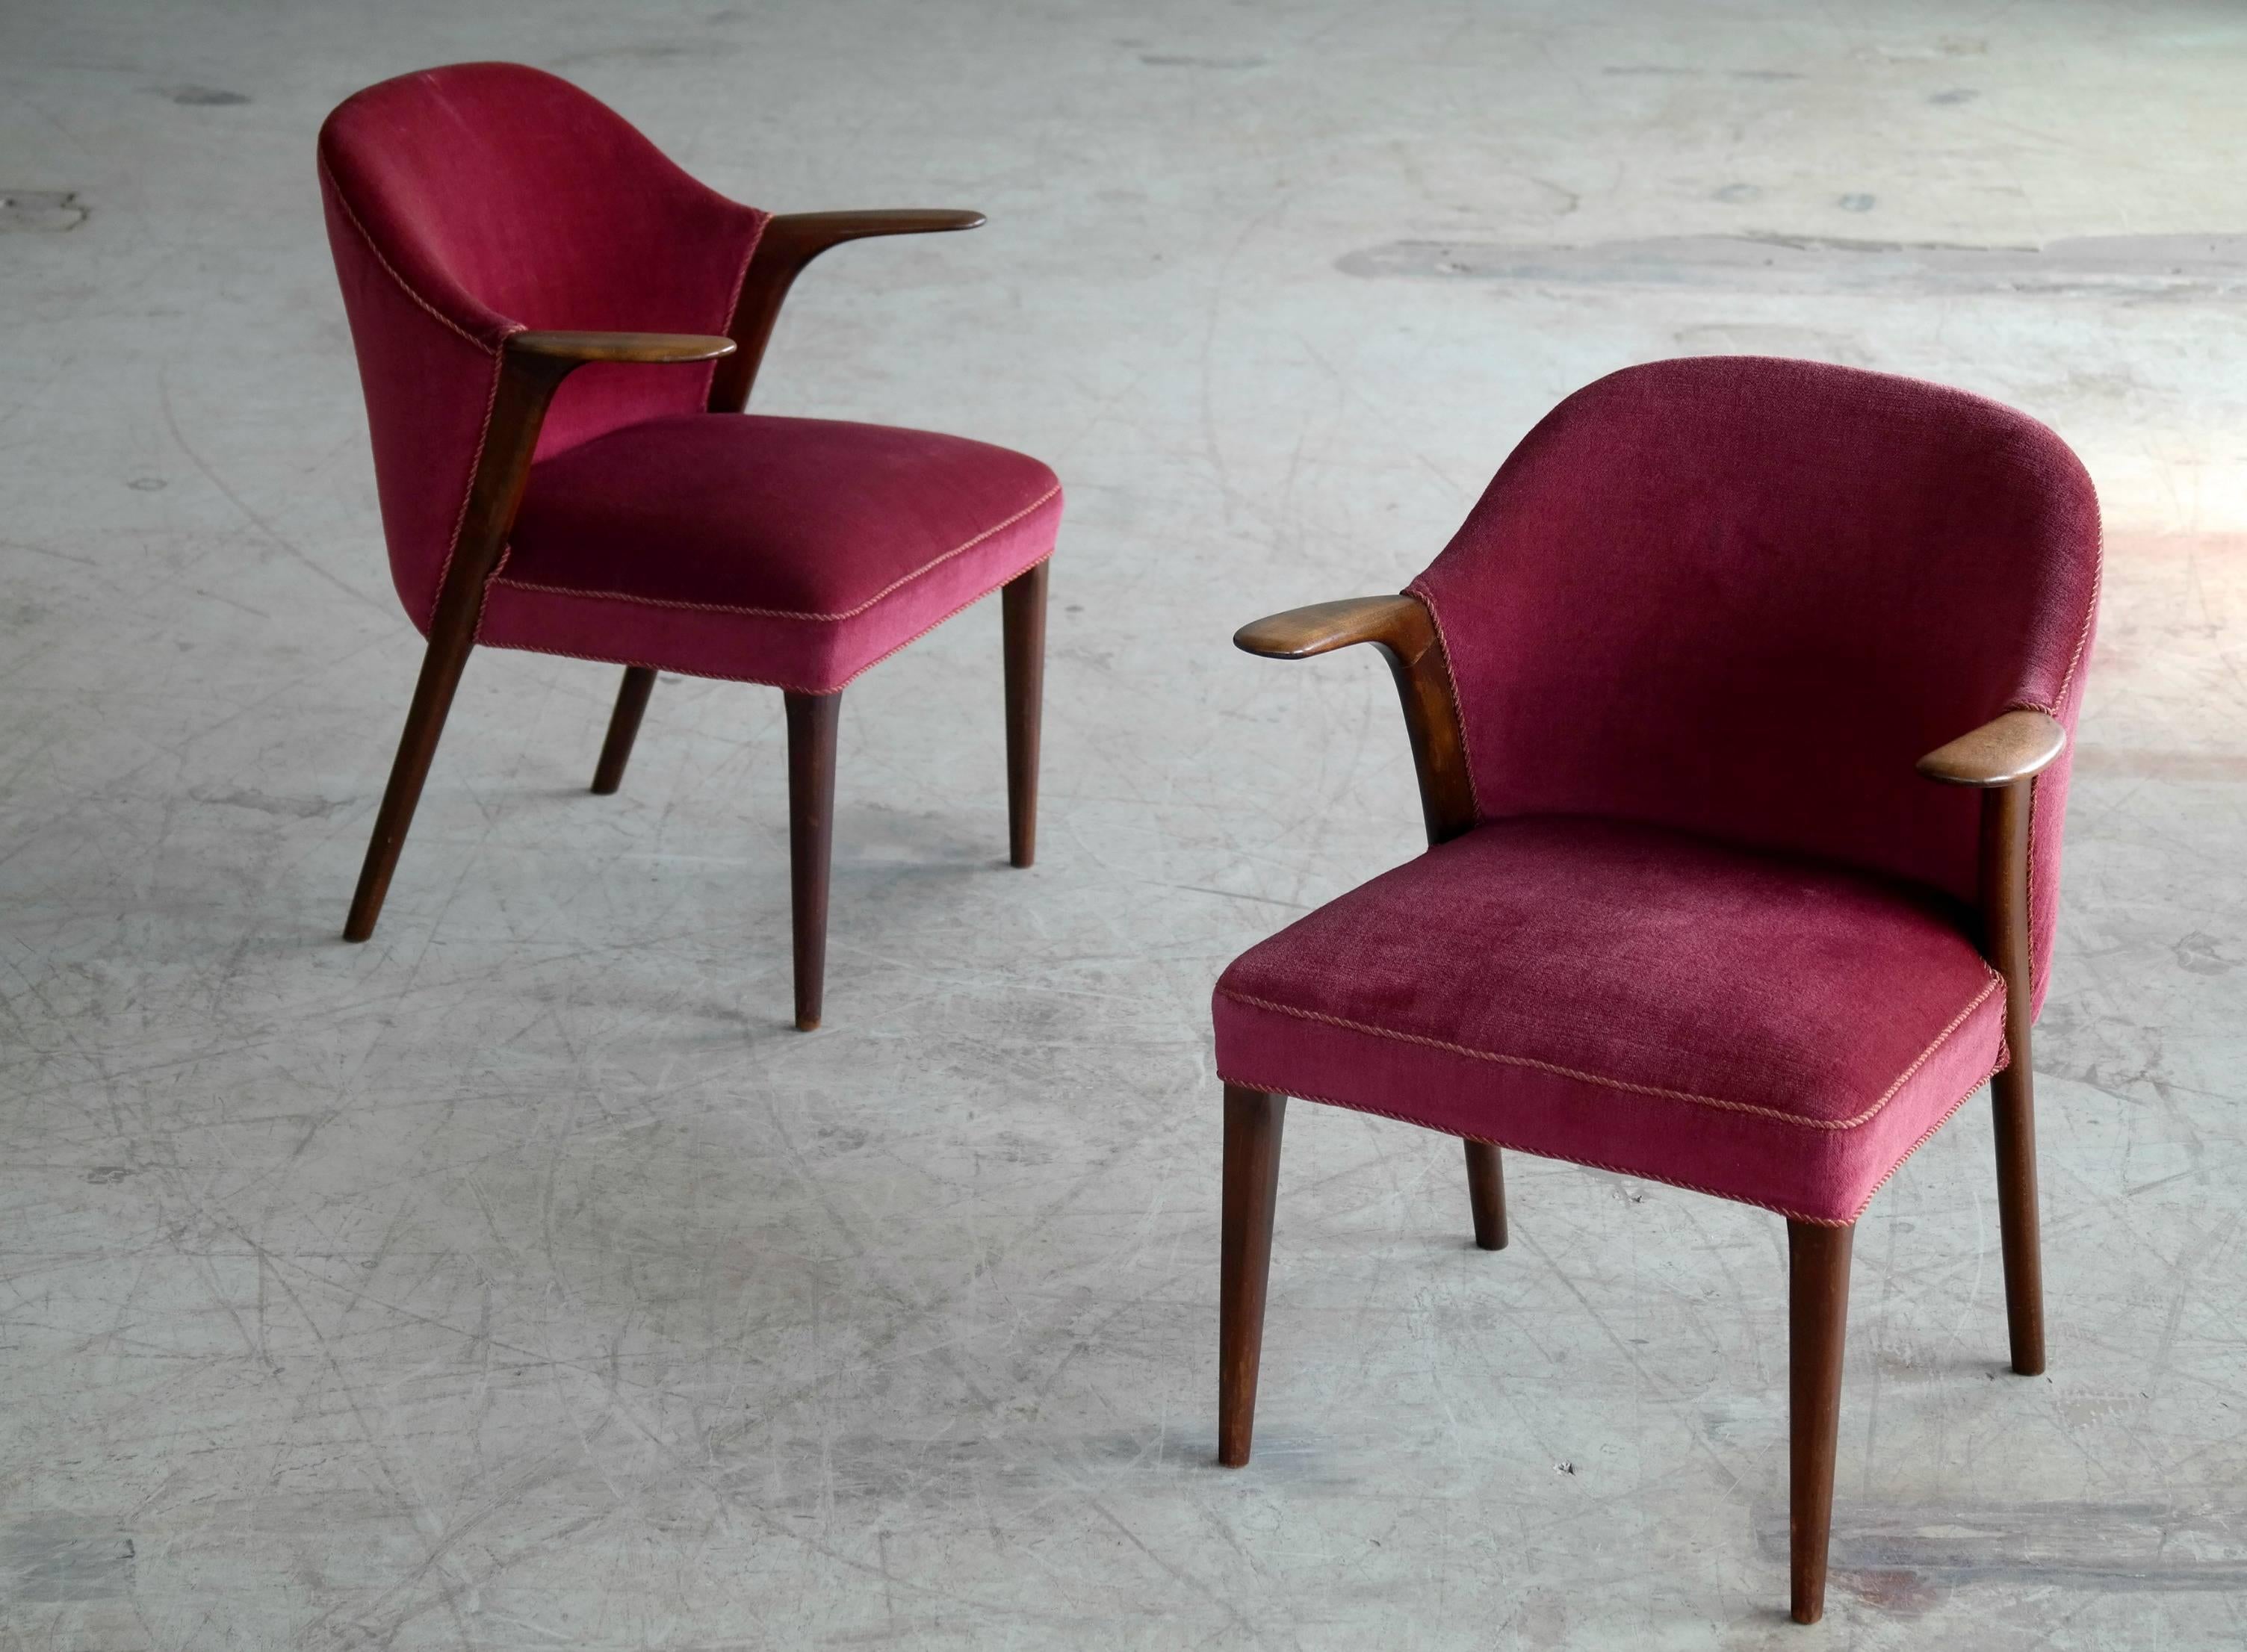 Mid-20th Century Knud Risager Pair of Mama Bear Style Lounge or Armchairs for Slagelse Møbelværk